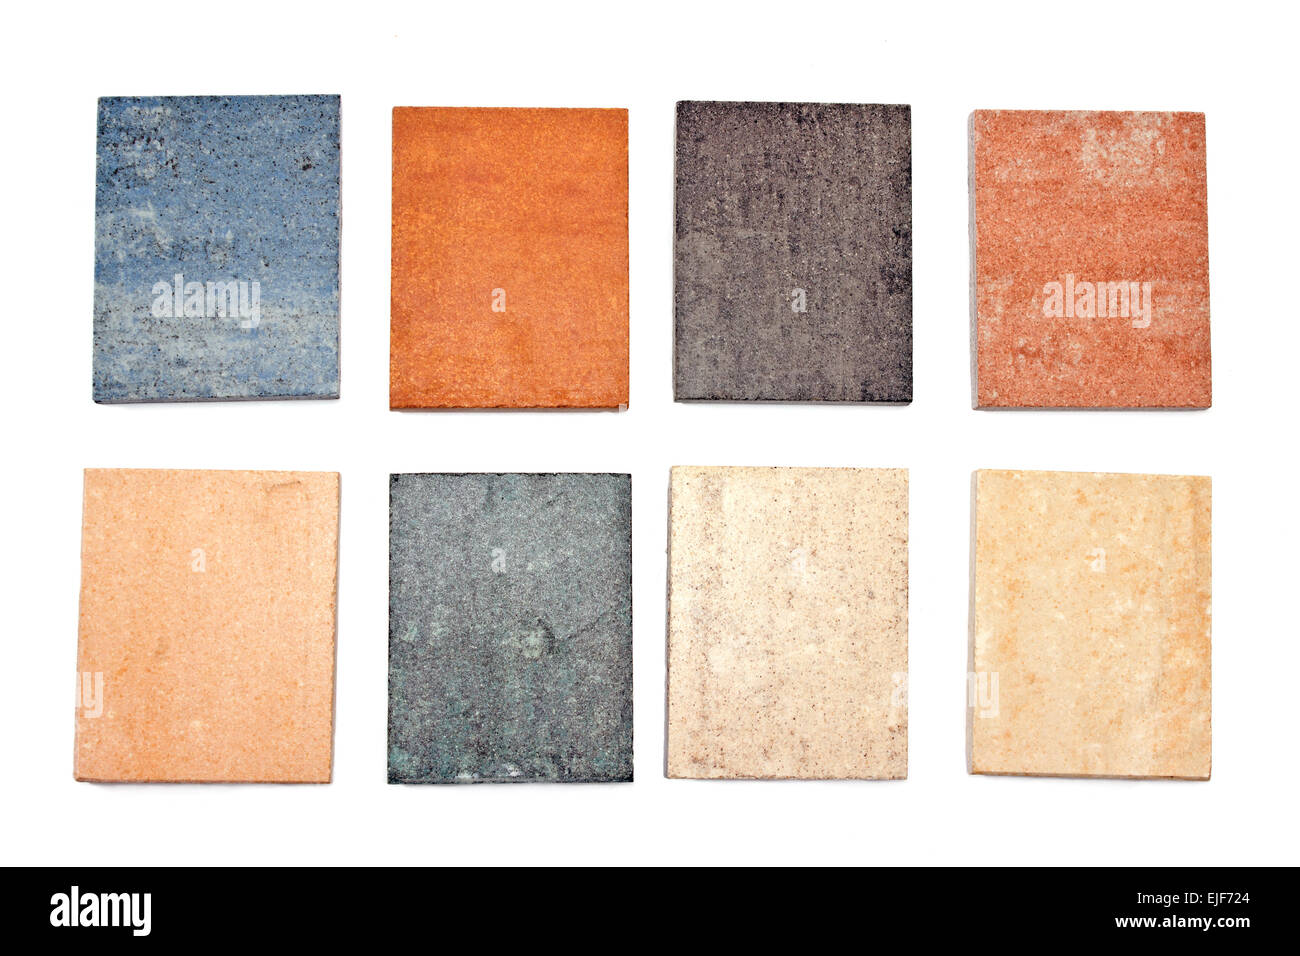 Colorful granite texture samples collection catalog Stock Photo